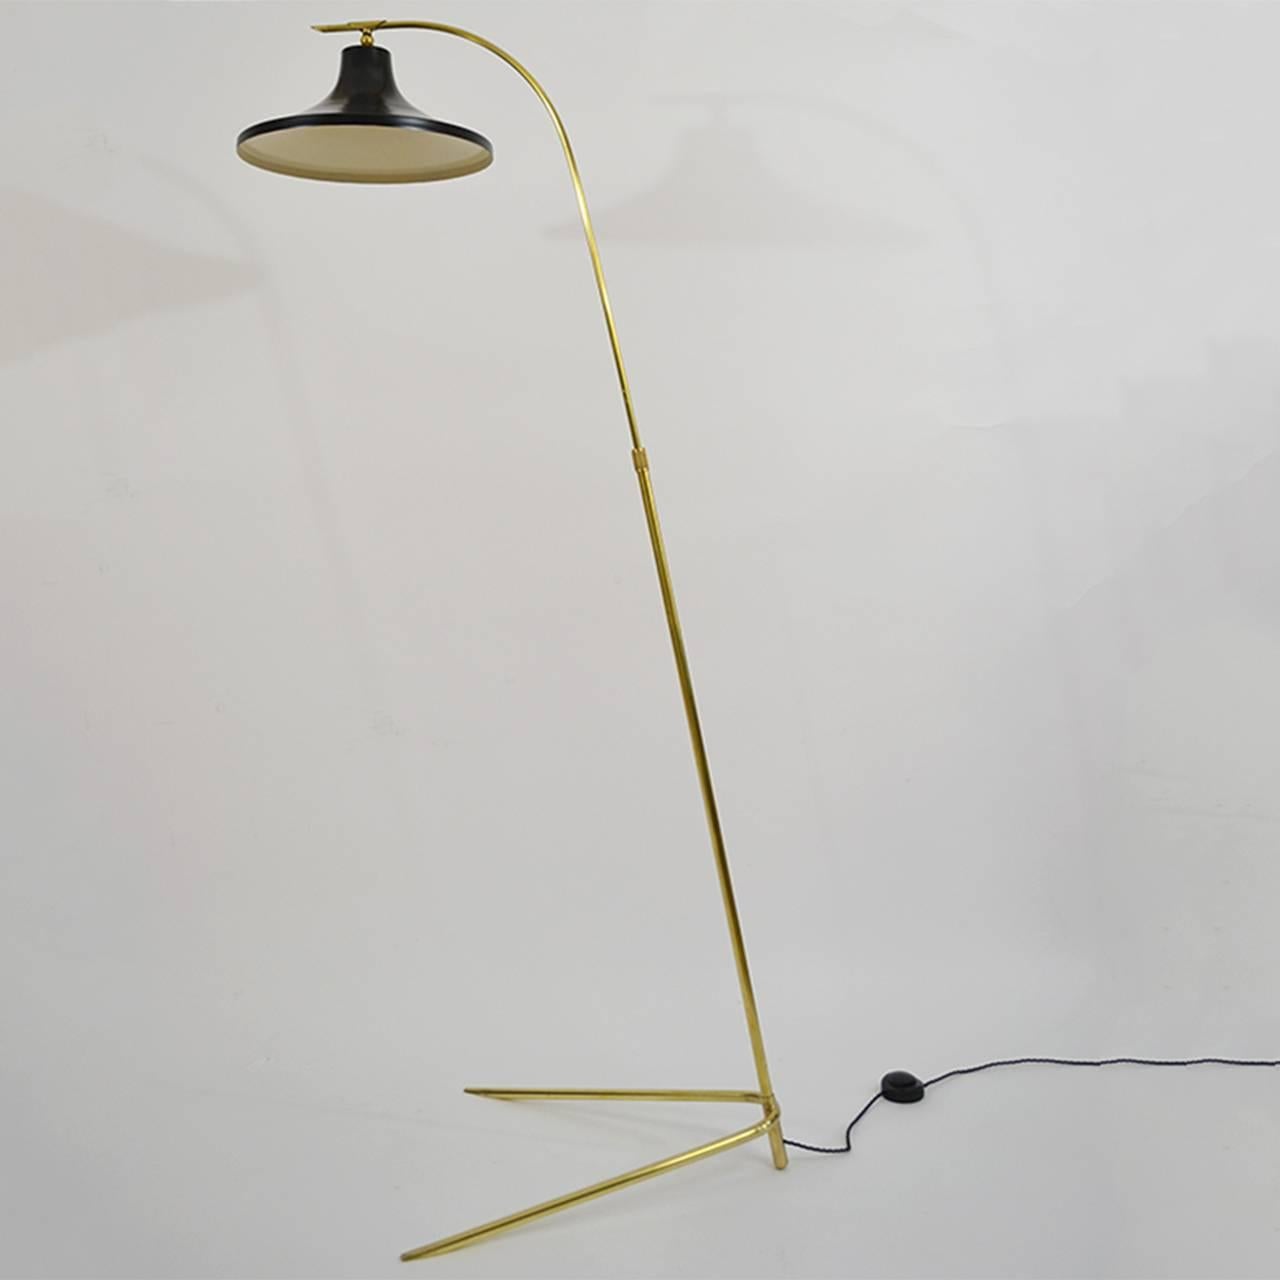 Brass and painted aluminium shade contemporary floor lamp.
All color shade available. Adjustable height.
Minimum height 152cm, maximum height 184cm.